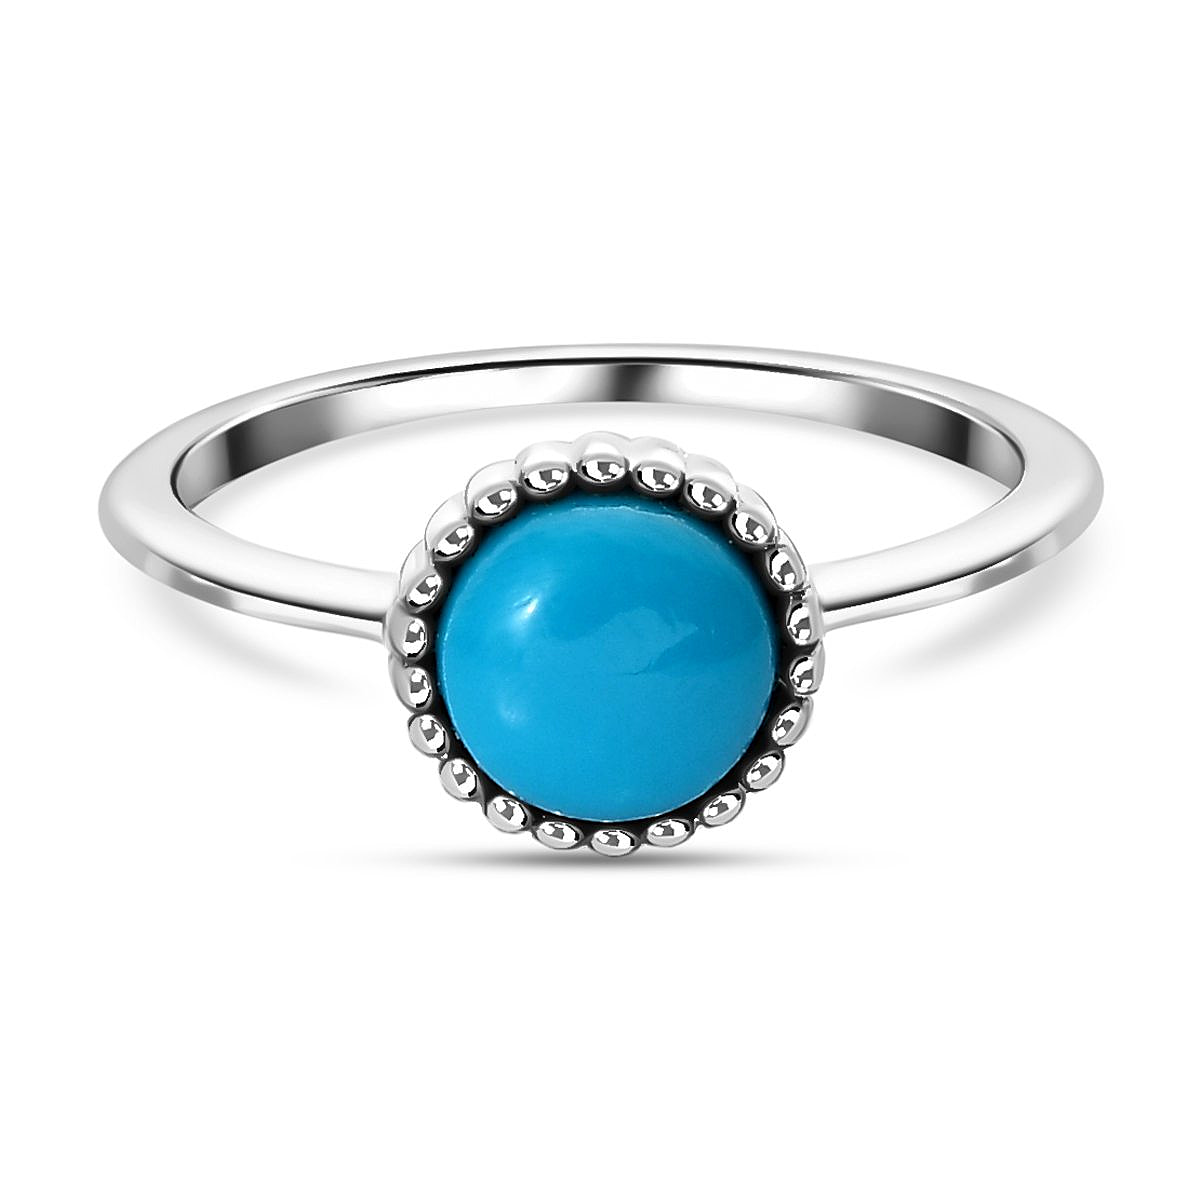 Arizona Sleeping Beauty Turquoise Ring in Platinum Overlay Sterling Silver  1.40 Ct